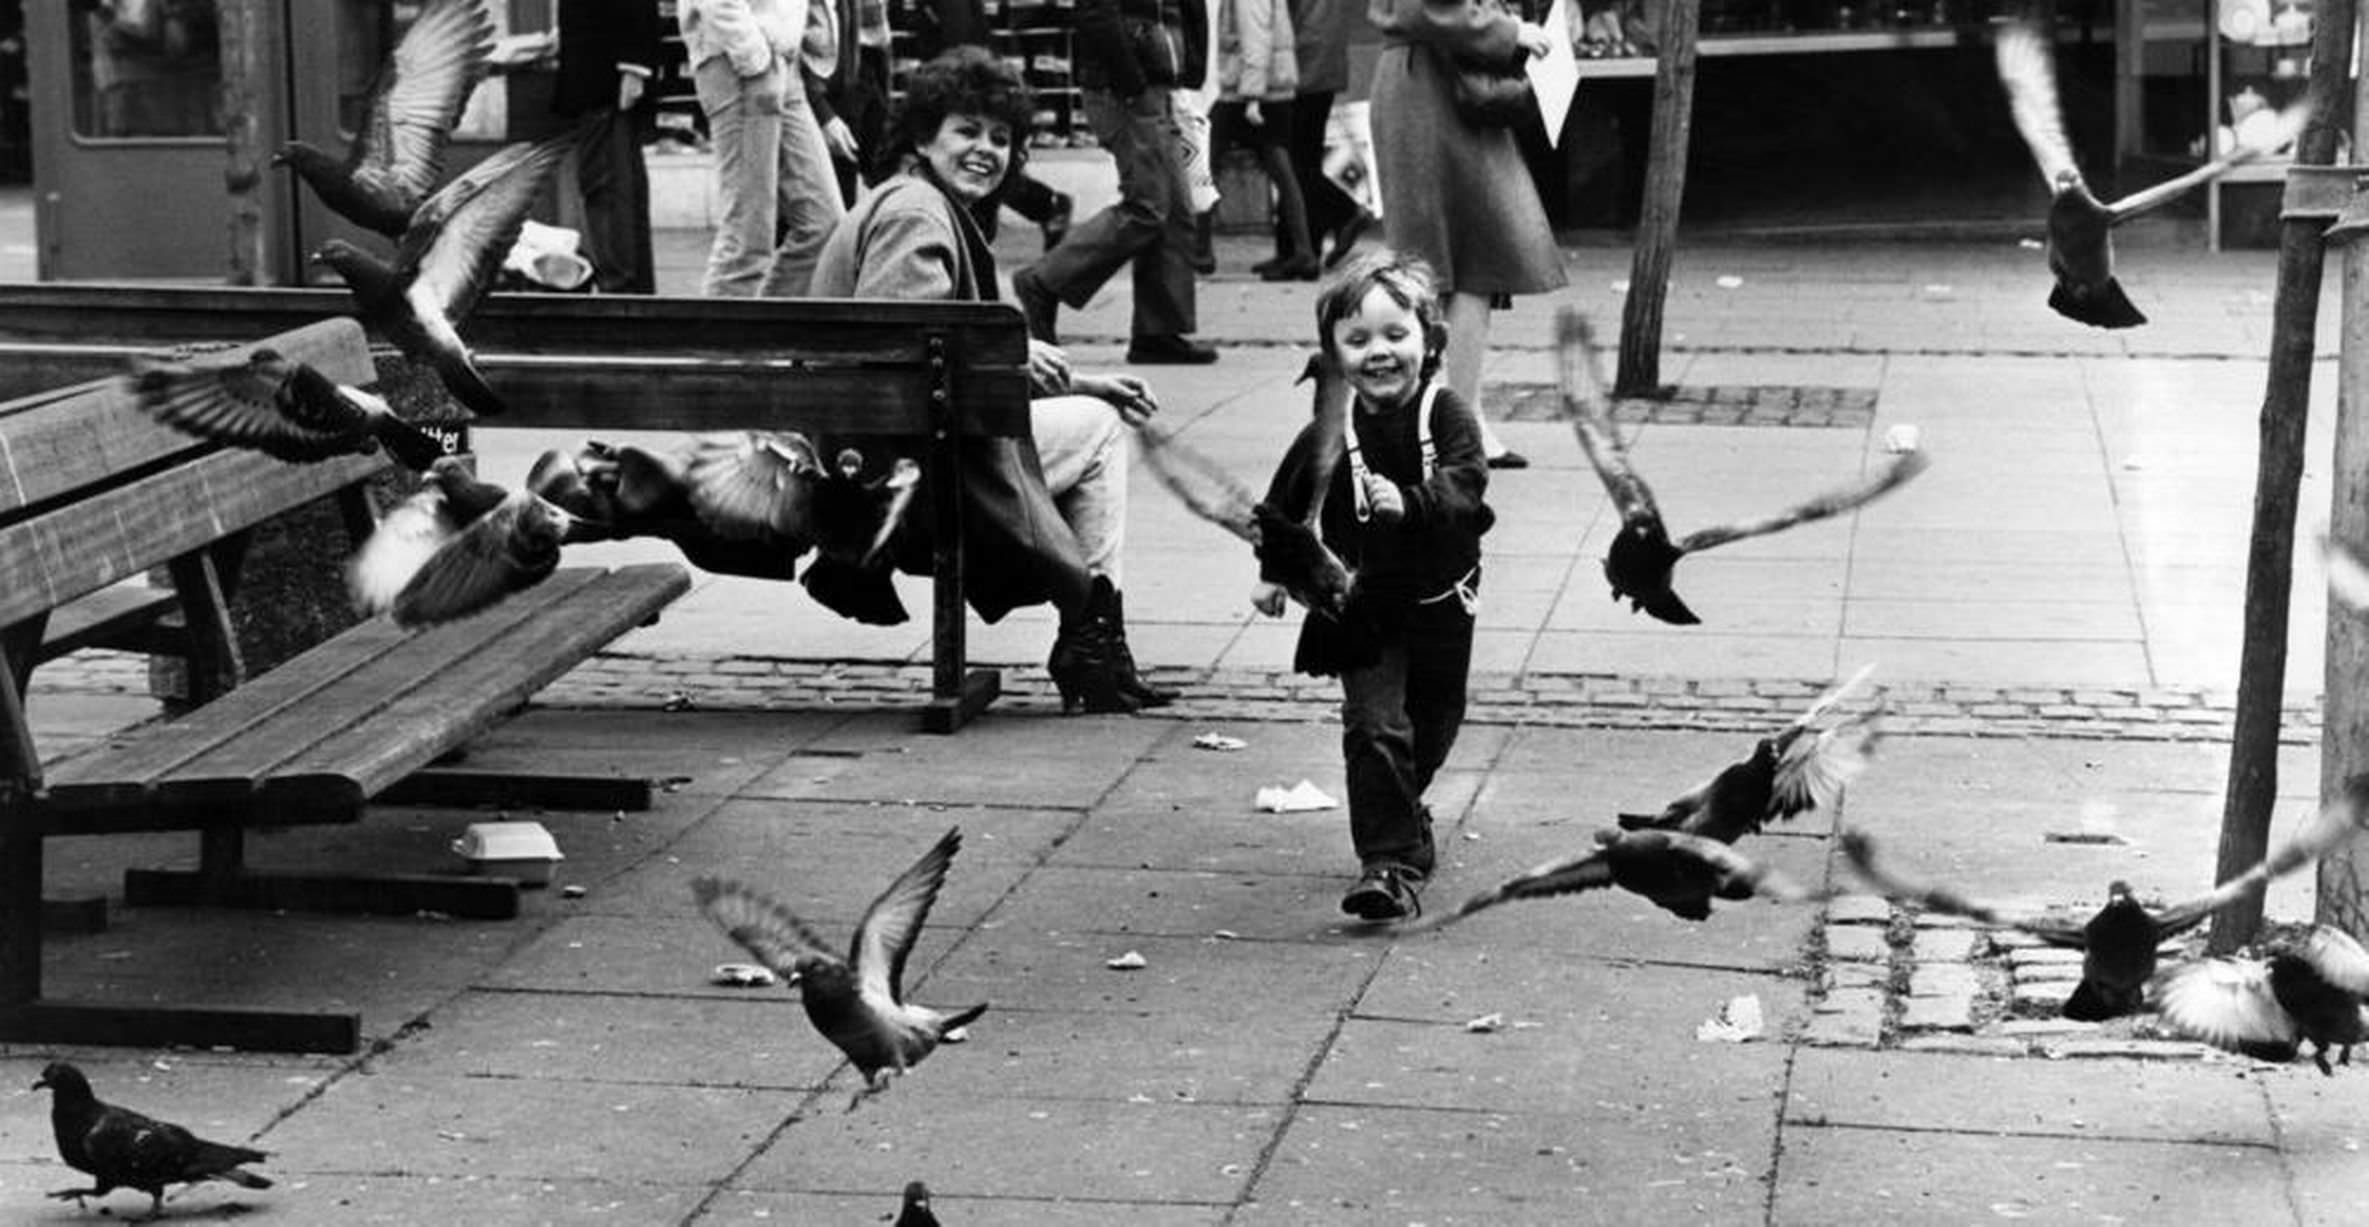 A young boy having fun chasing pigeons, Liverpool, 13th April 1984.